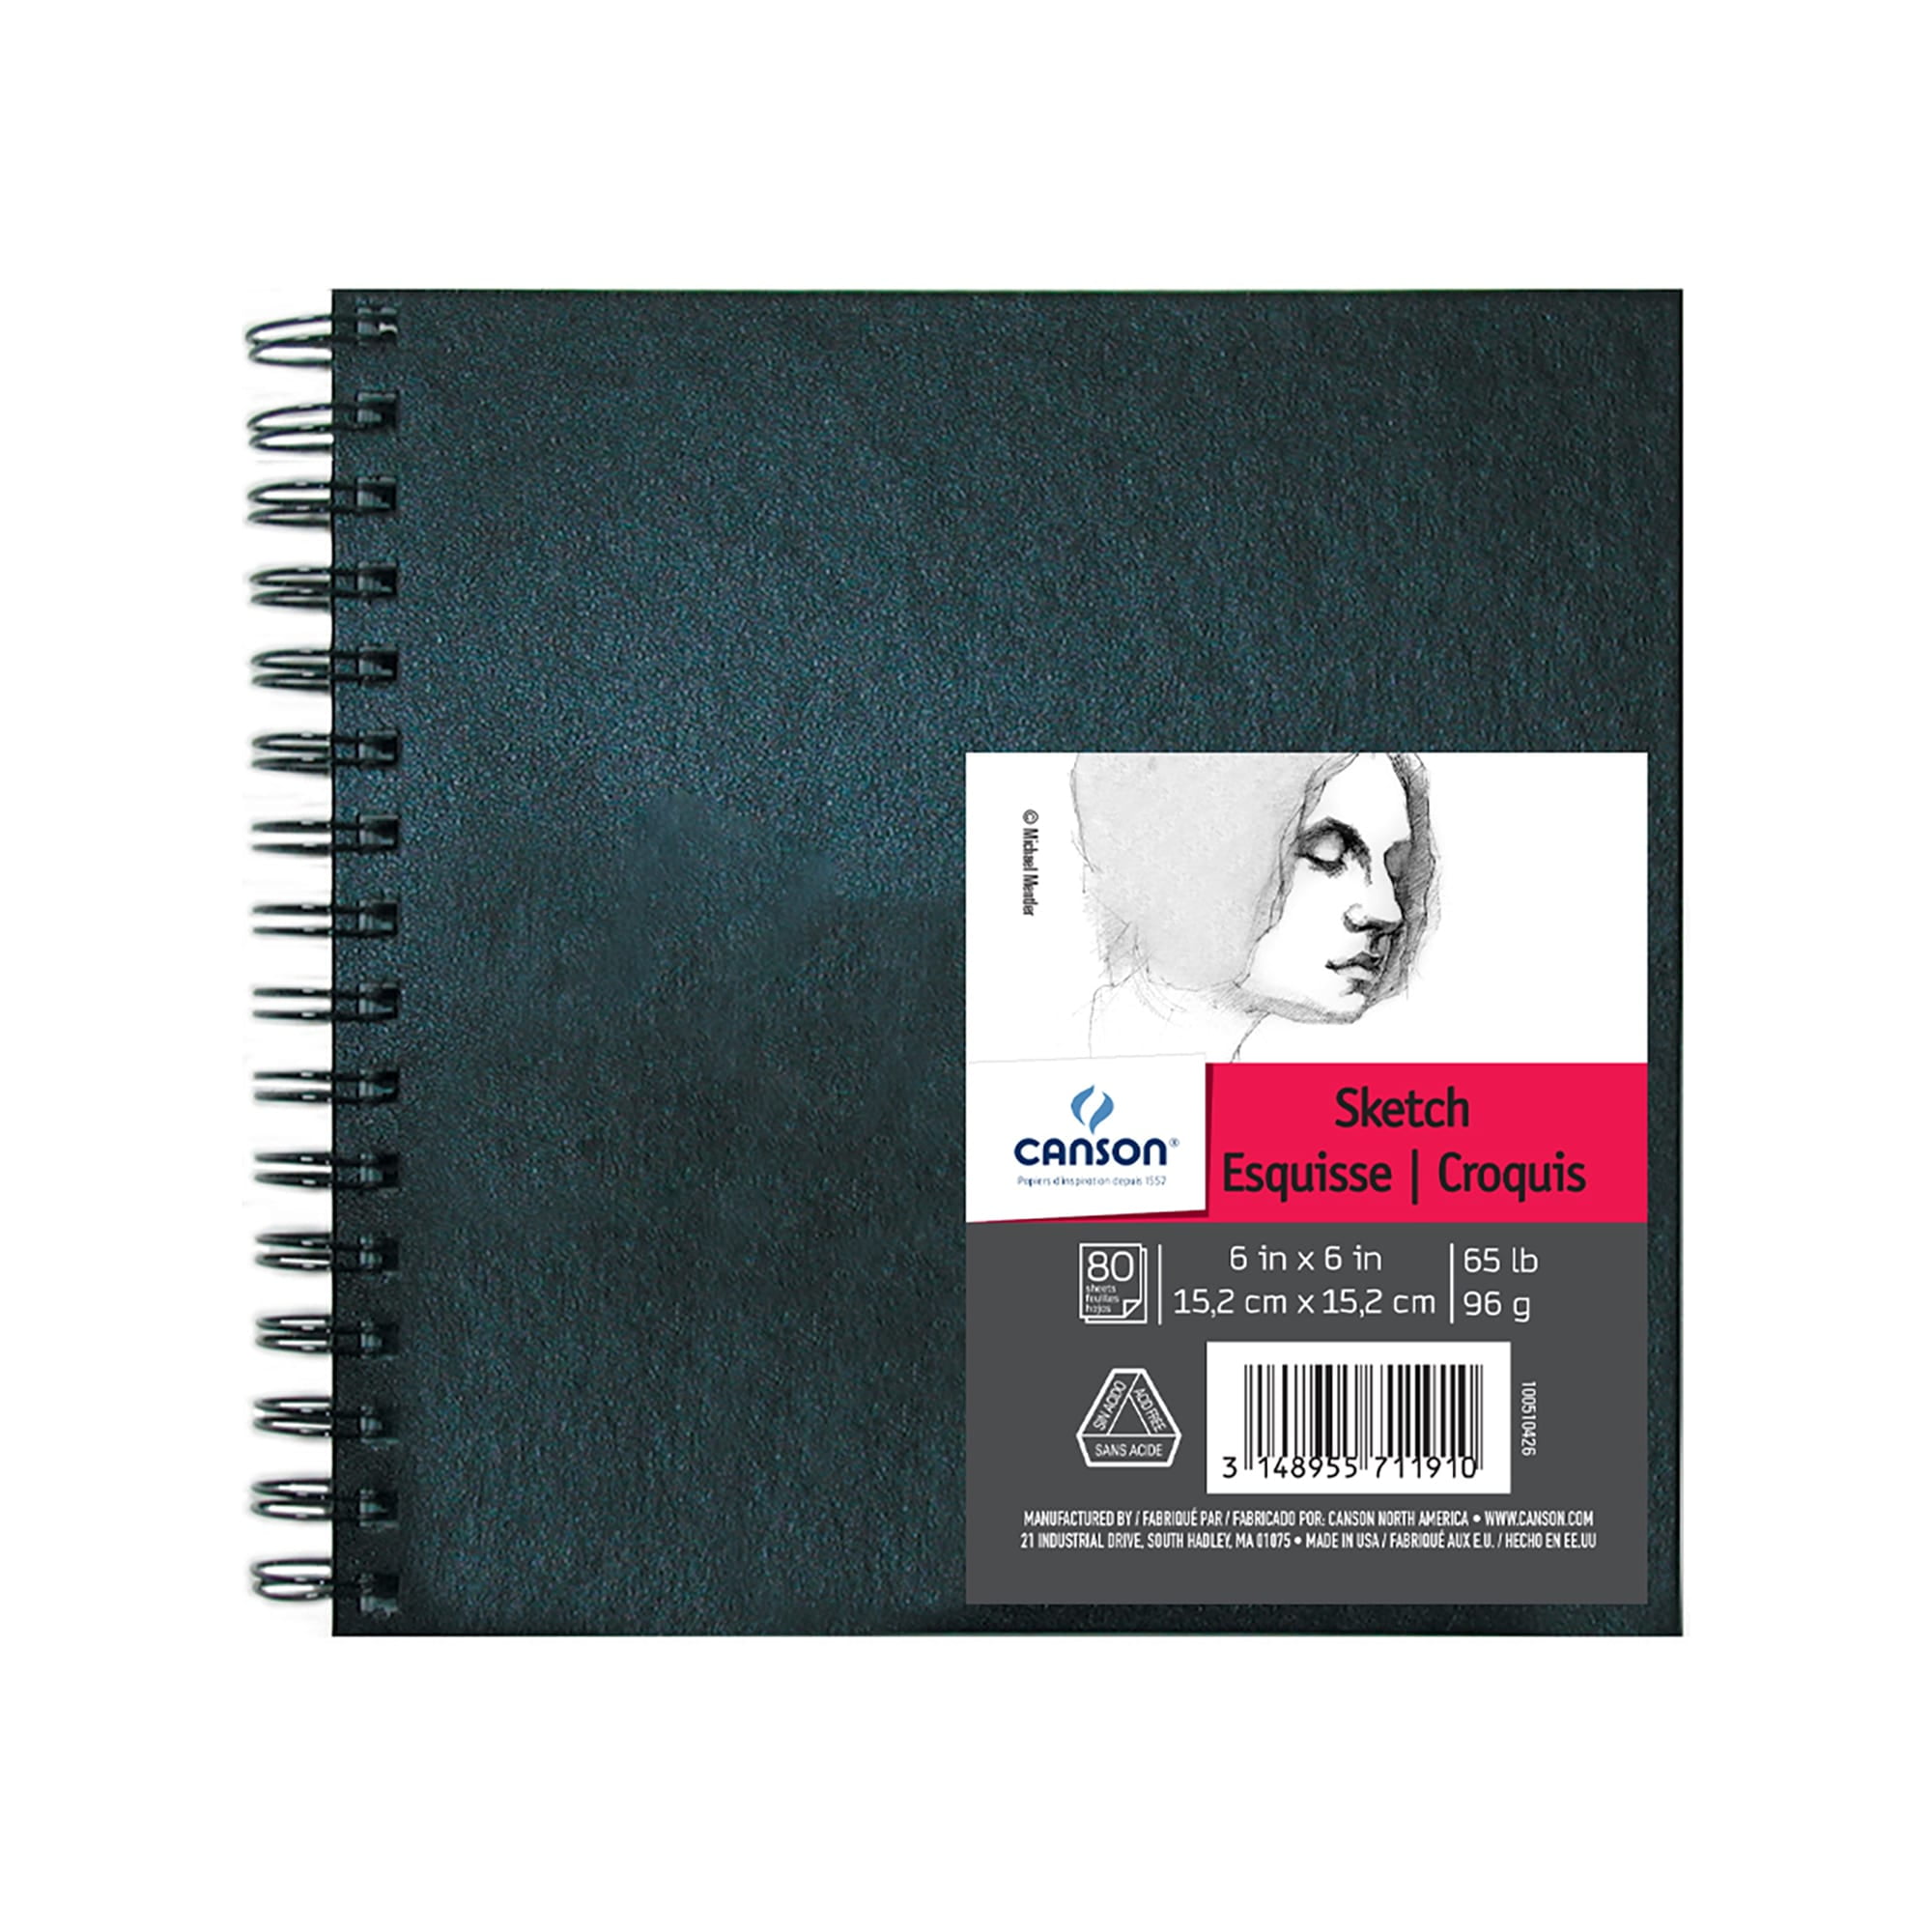 Artists Sketchbook for Drawing 9x12 with Spiral Bound - Sketch Book for  Drawing & Sketching 100 Sheets 70lb - Sketch Pad for Pencil, Pen, Marker - Acid-Free  Paper - Adults 